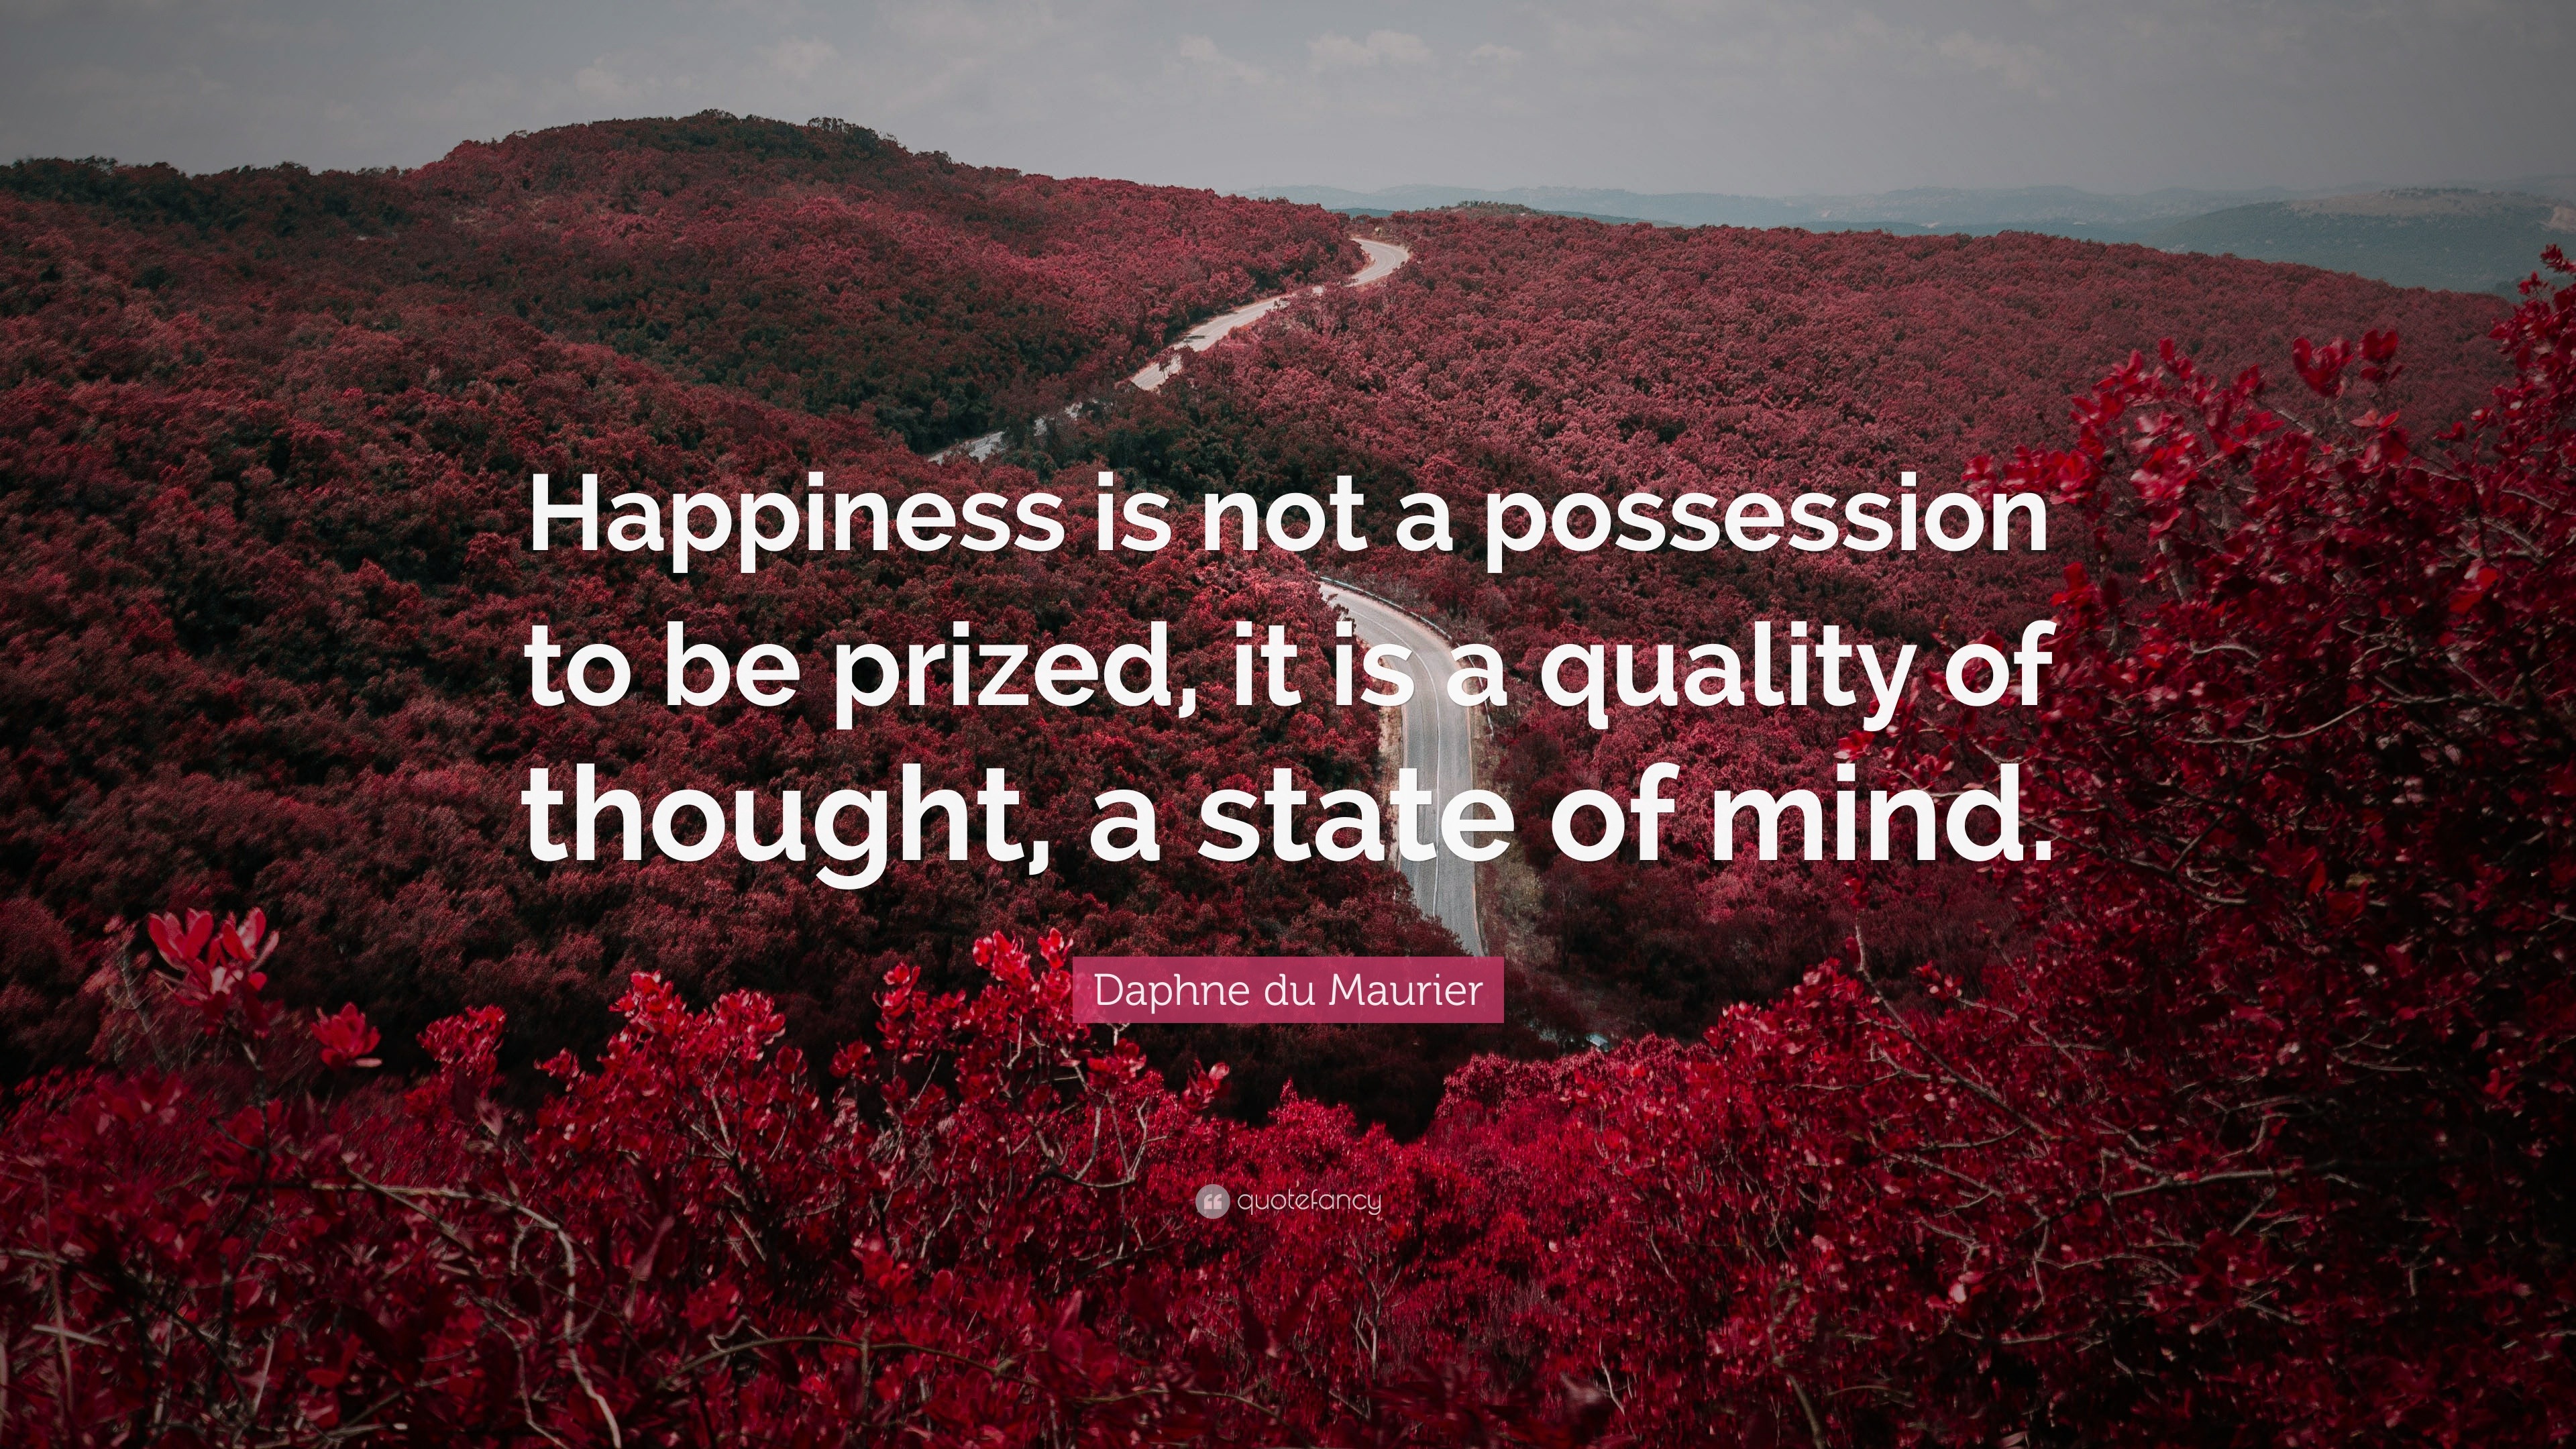 Happiness Quotes “Happiness is not a possession to be prized it is a